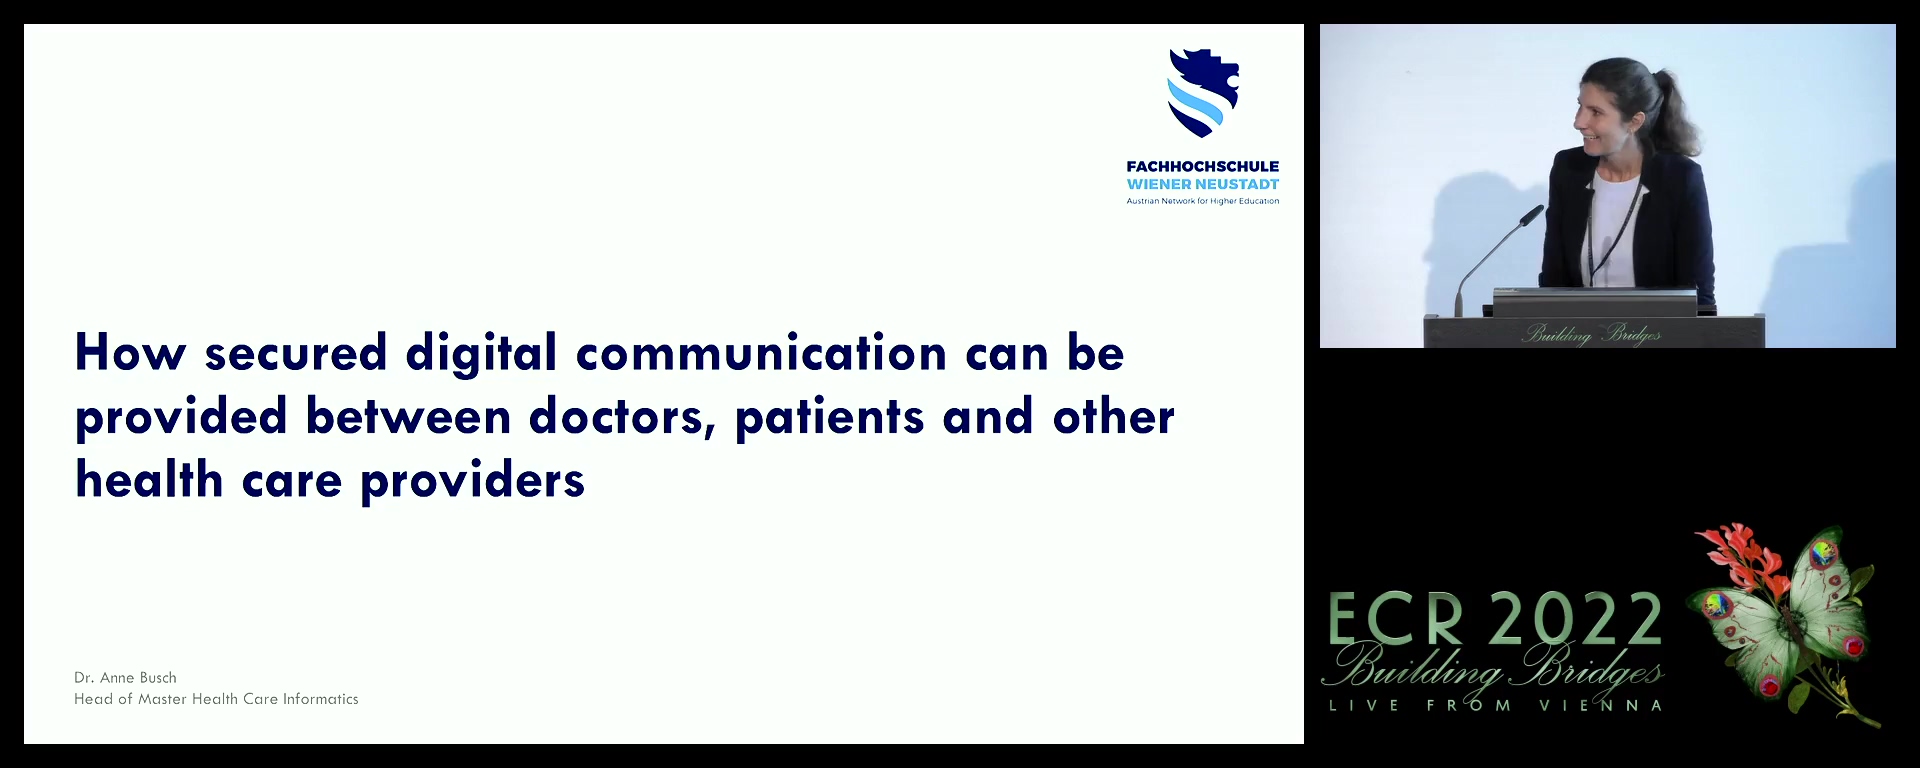 How secured digital communication can be provided between doctors, patients and other health care providers - Anne Busch, Wiener Neustadt / AT